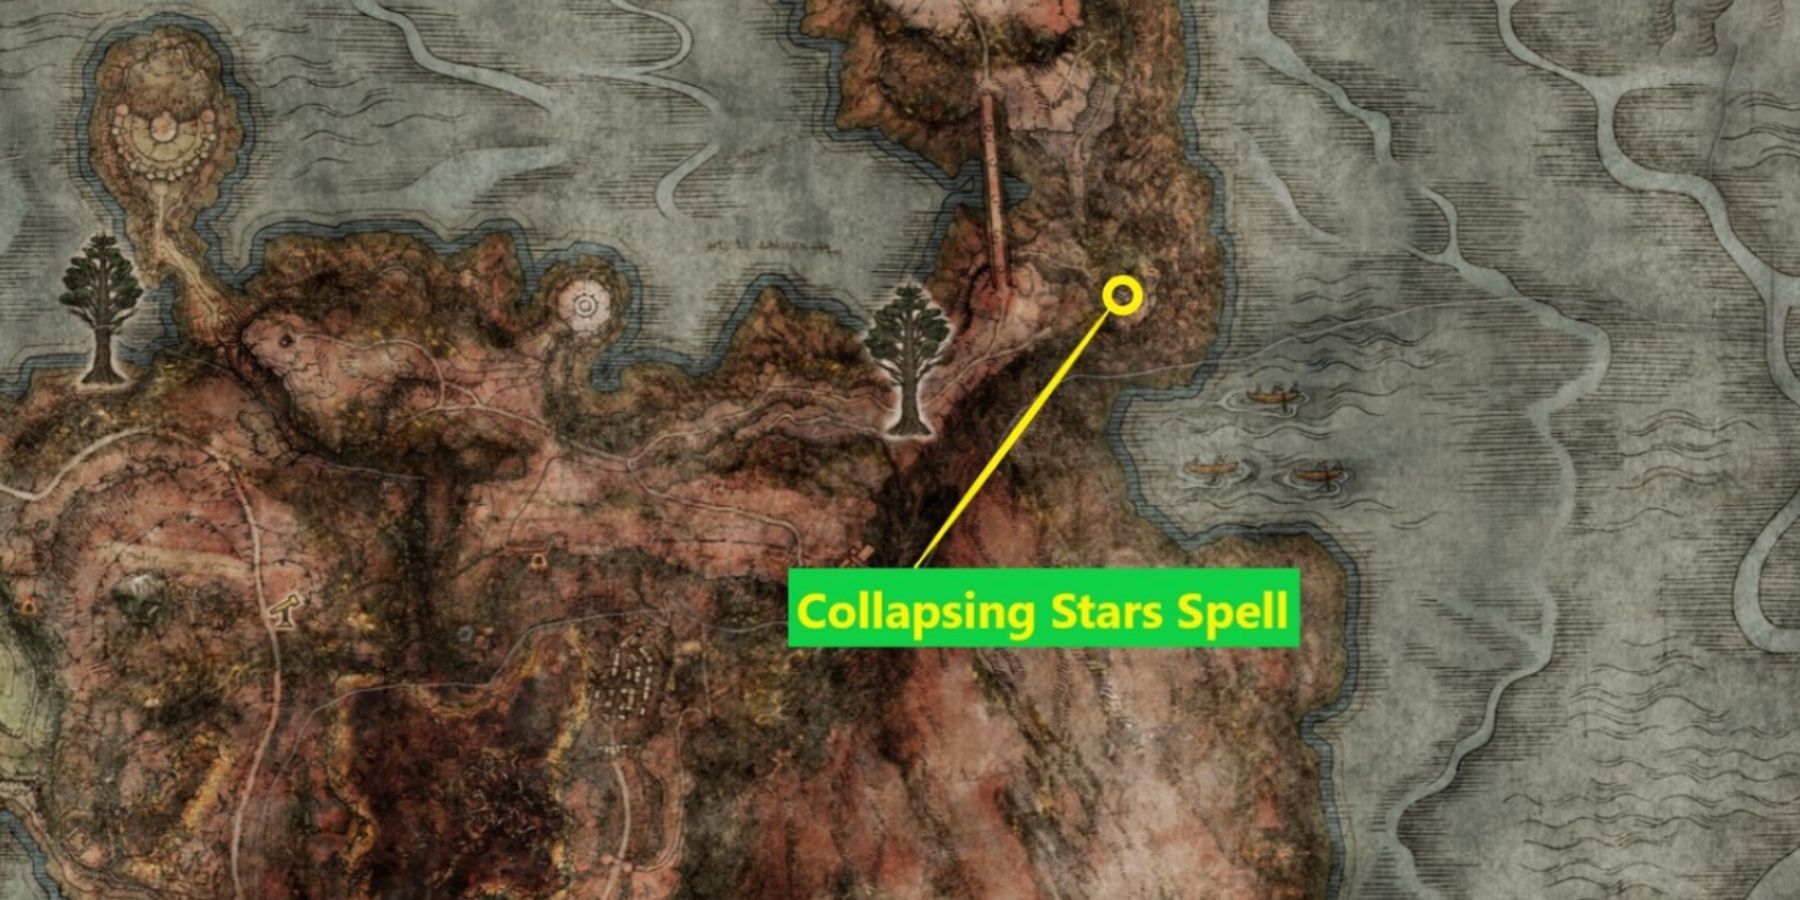 Collapsing Stars Spell location on the map in Elden Ring